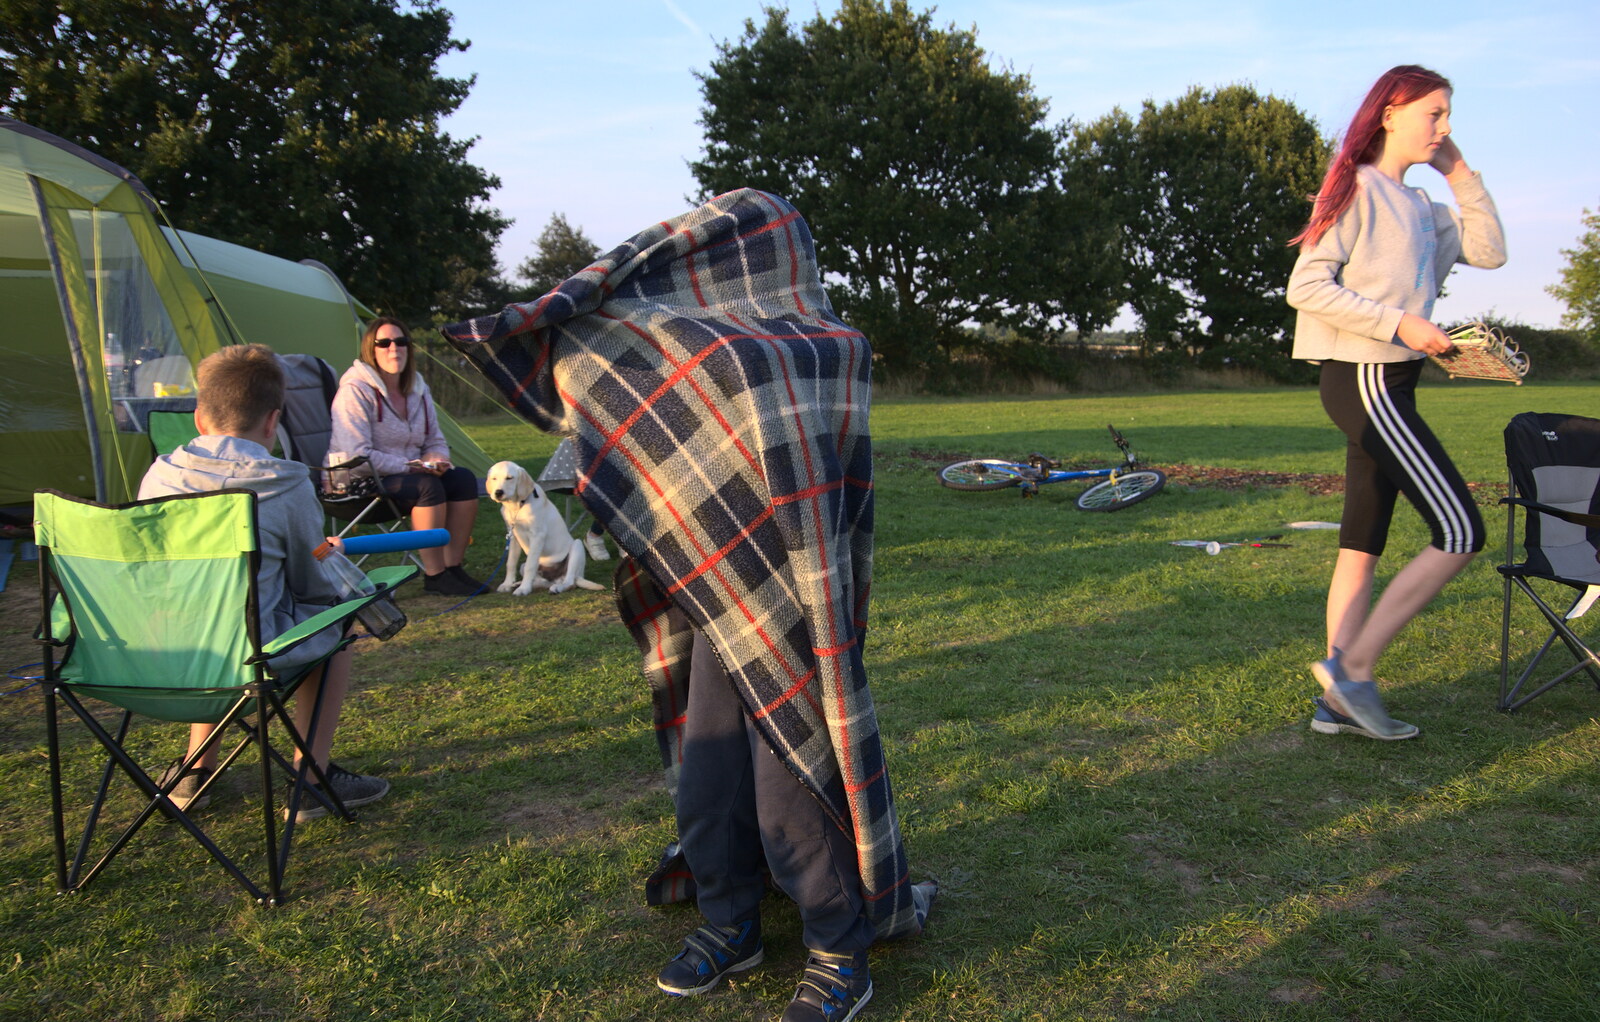 Harry roams around in a blanket disguise from A Spot of Camping, Alton Water, Stutton, Suffolk - 1st September 2018